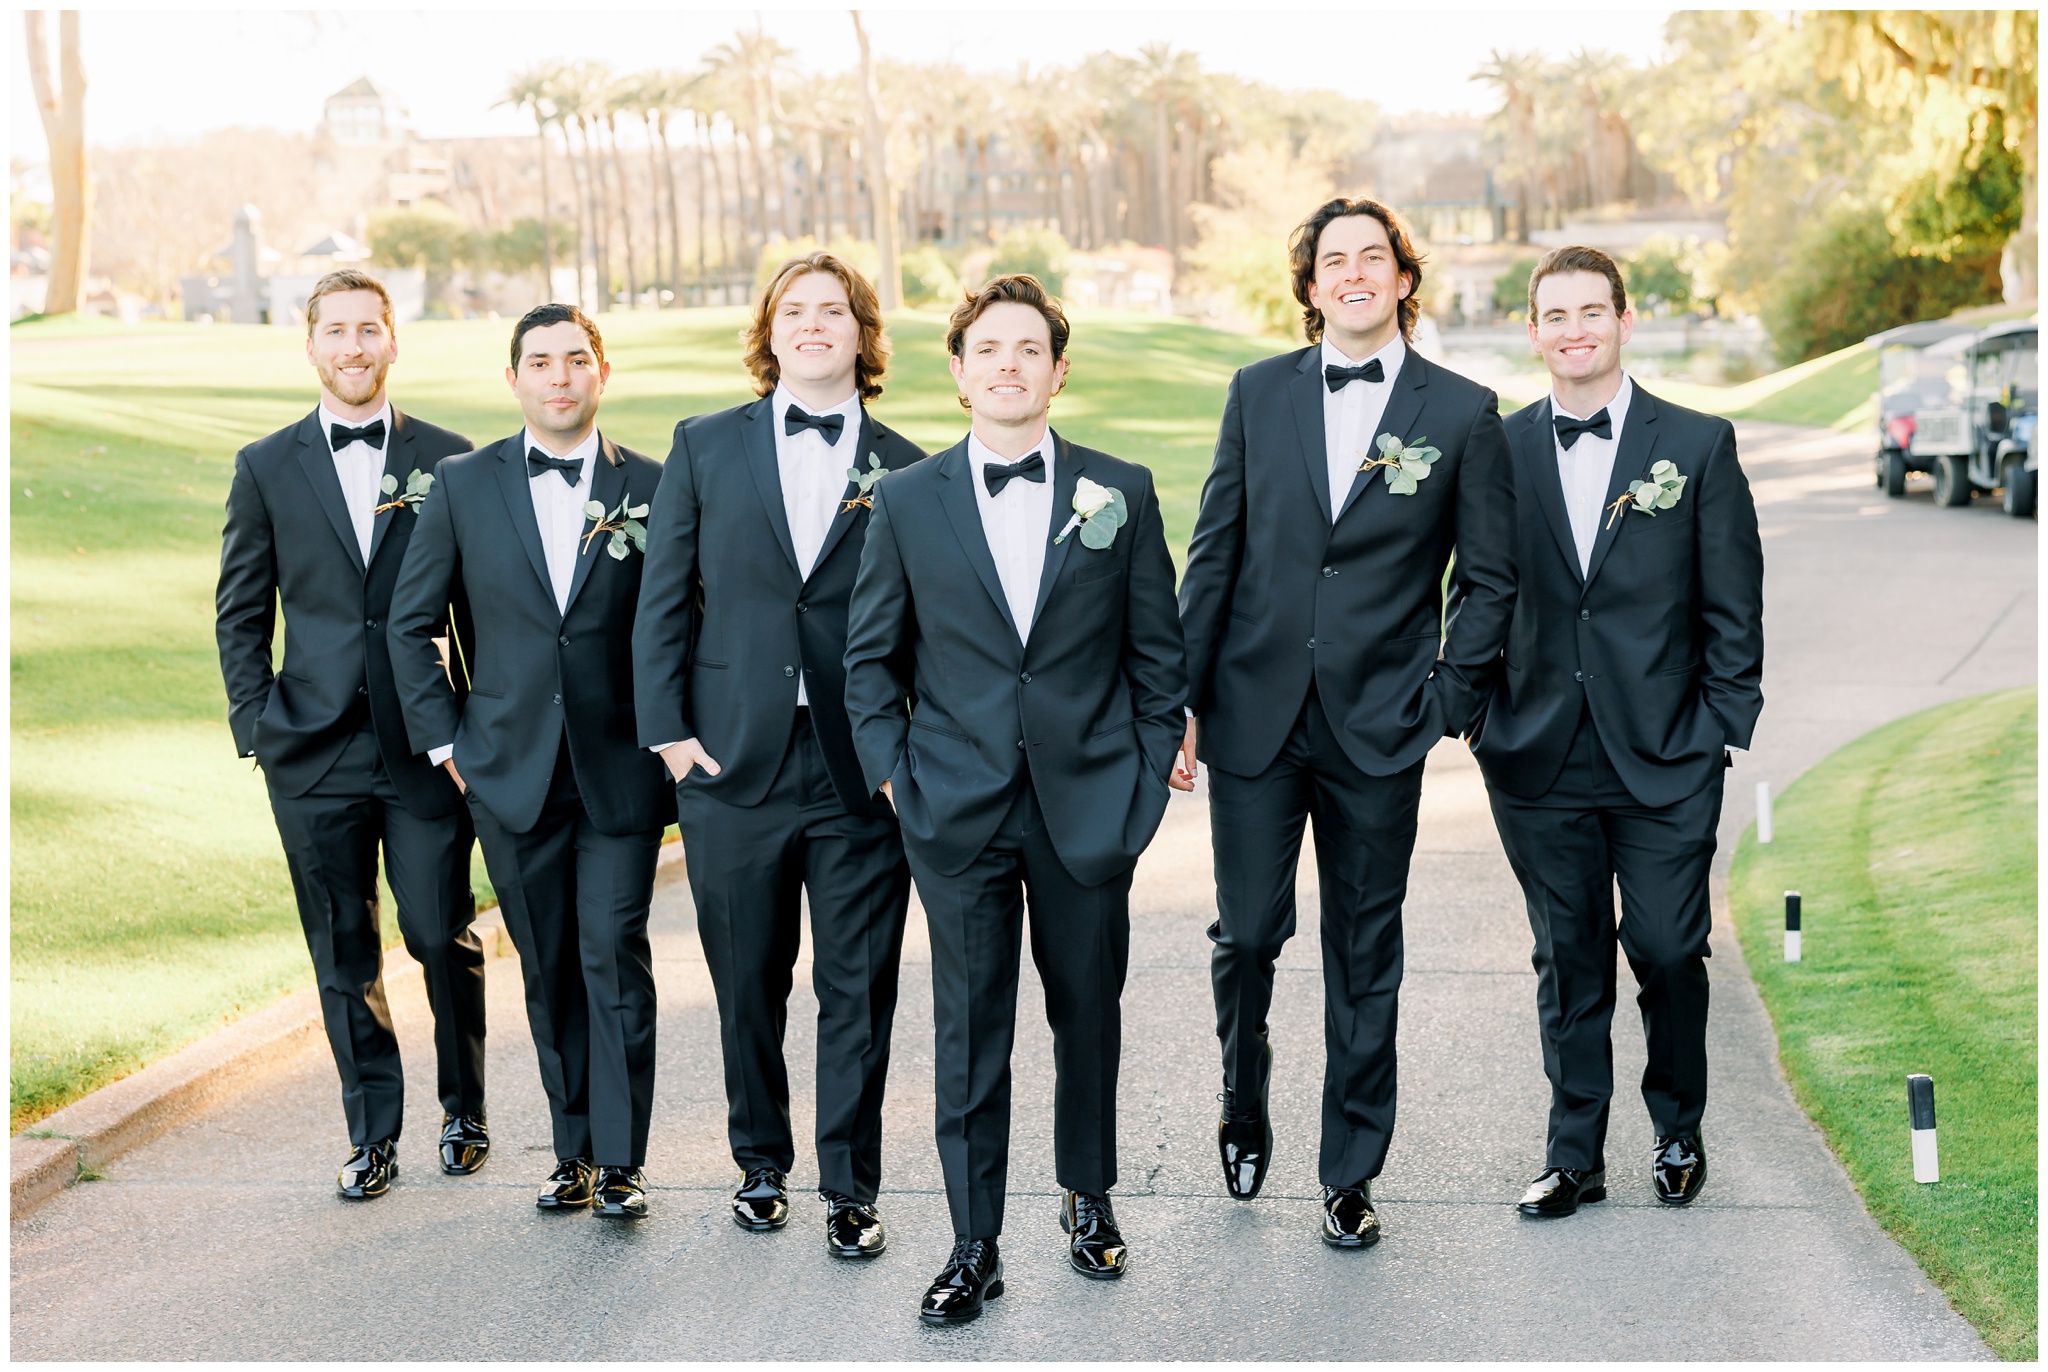 Groom with groomsmen walking at Gainey ranch in black tuxedos